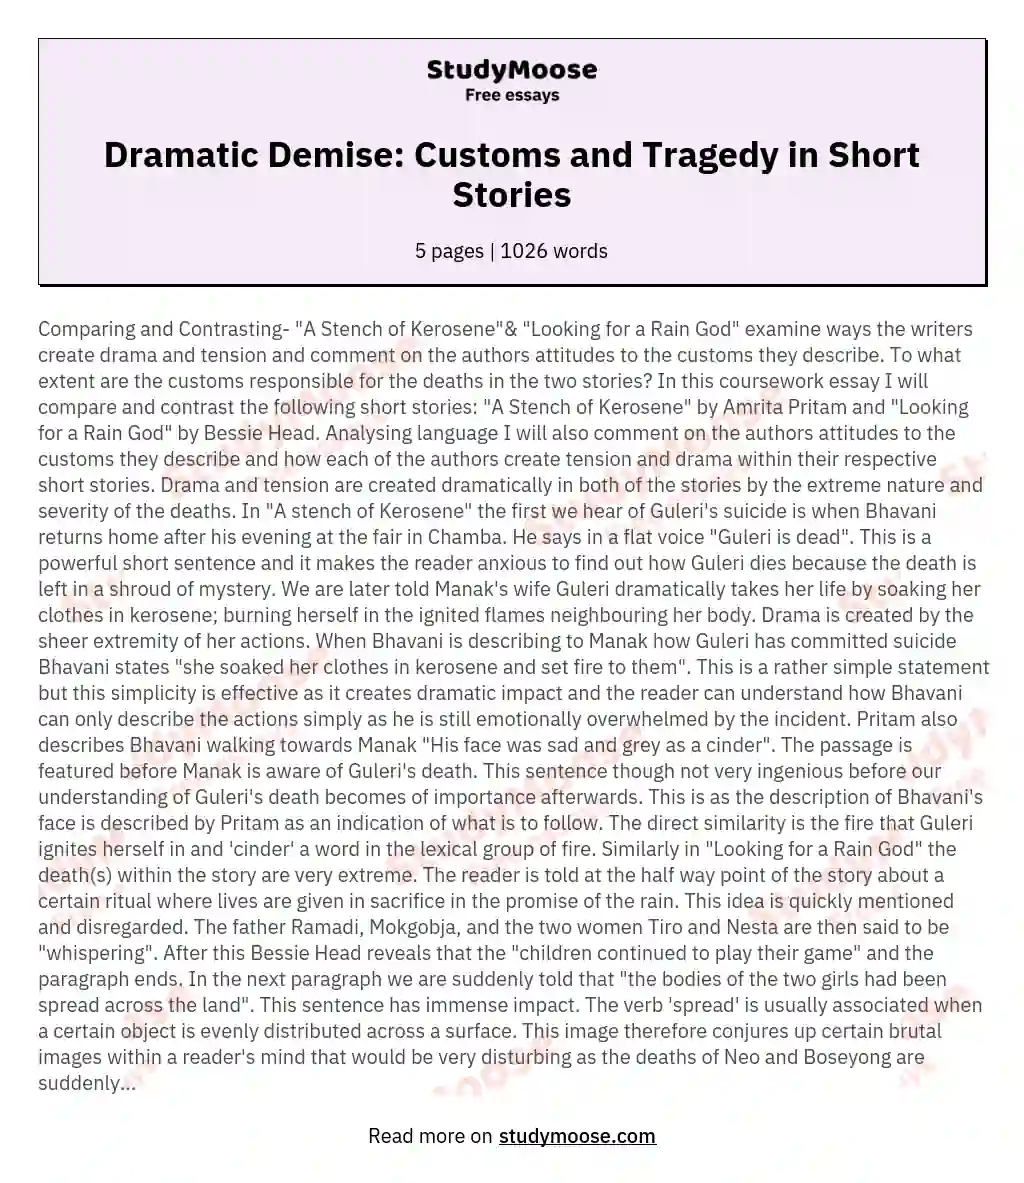 Dramatic Demise: Customs and Tragedy in Short Stories essay